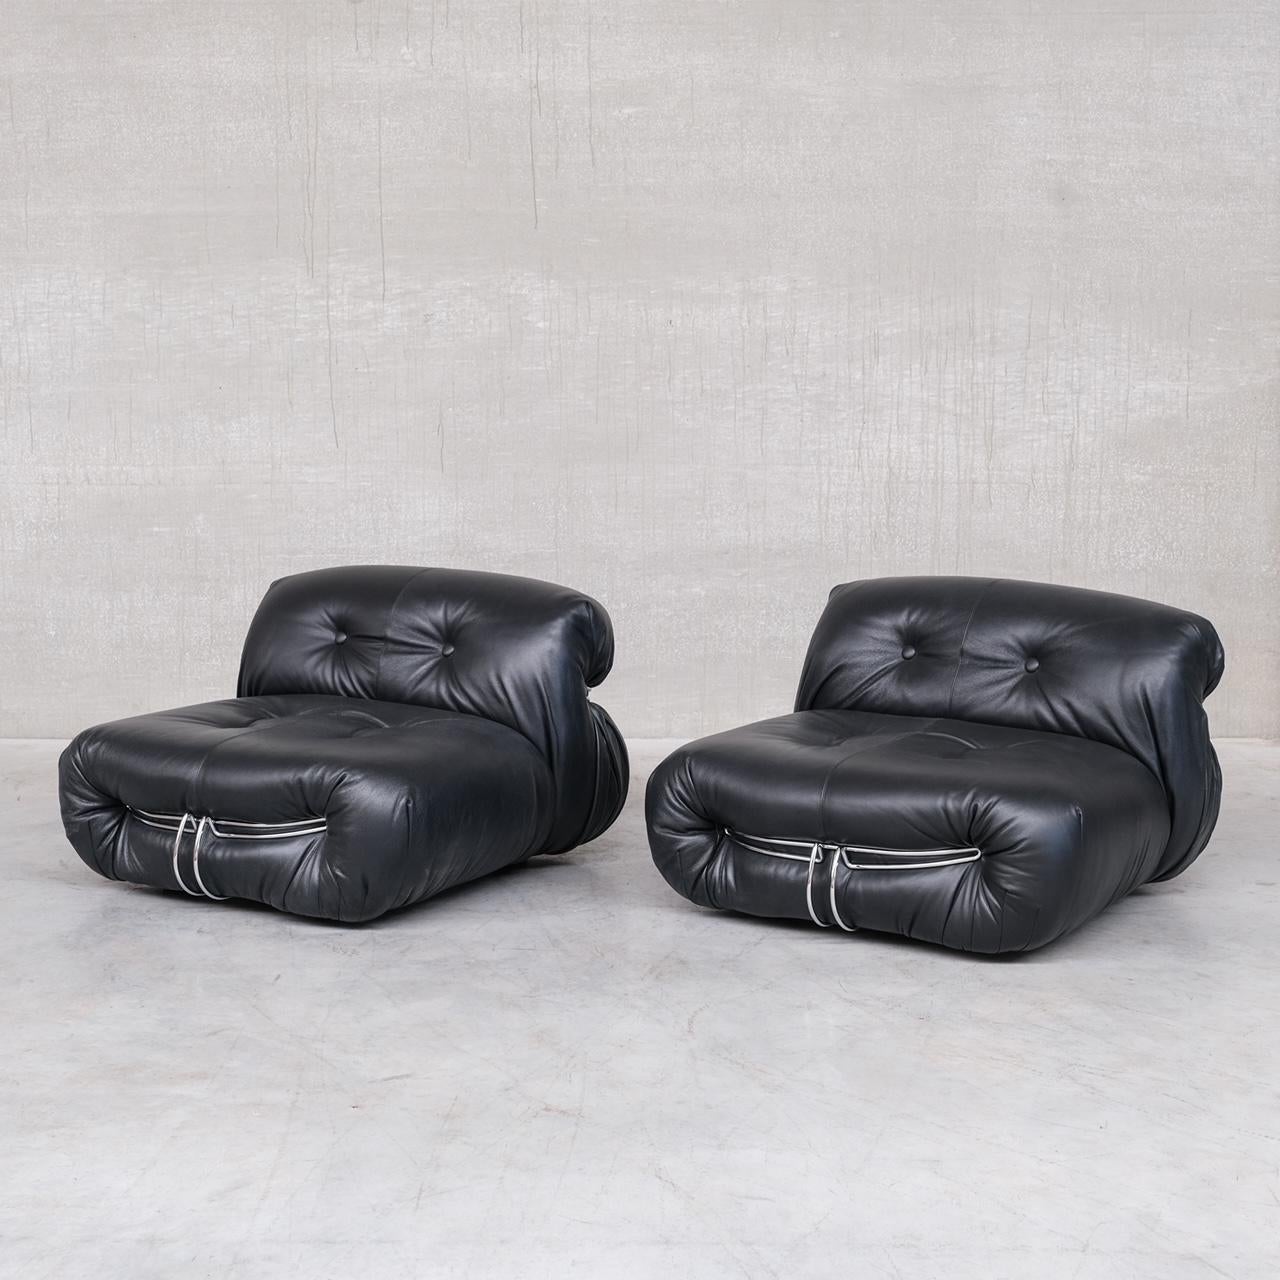 20th Century Pair of Leather Soriana Lounge Chairs by Scarpa for Cassina